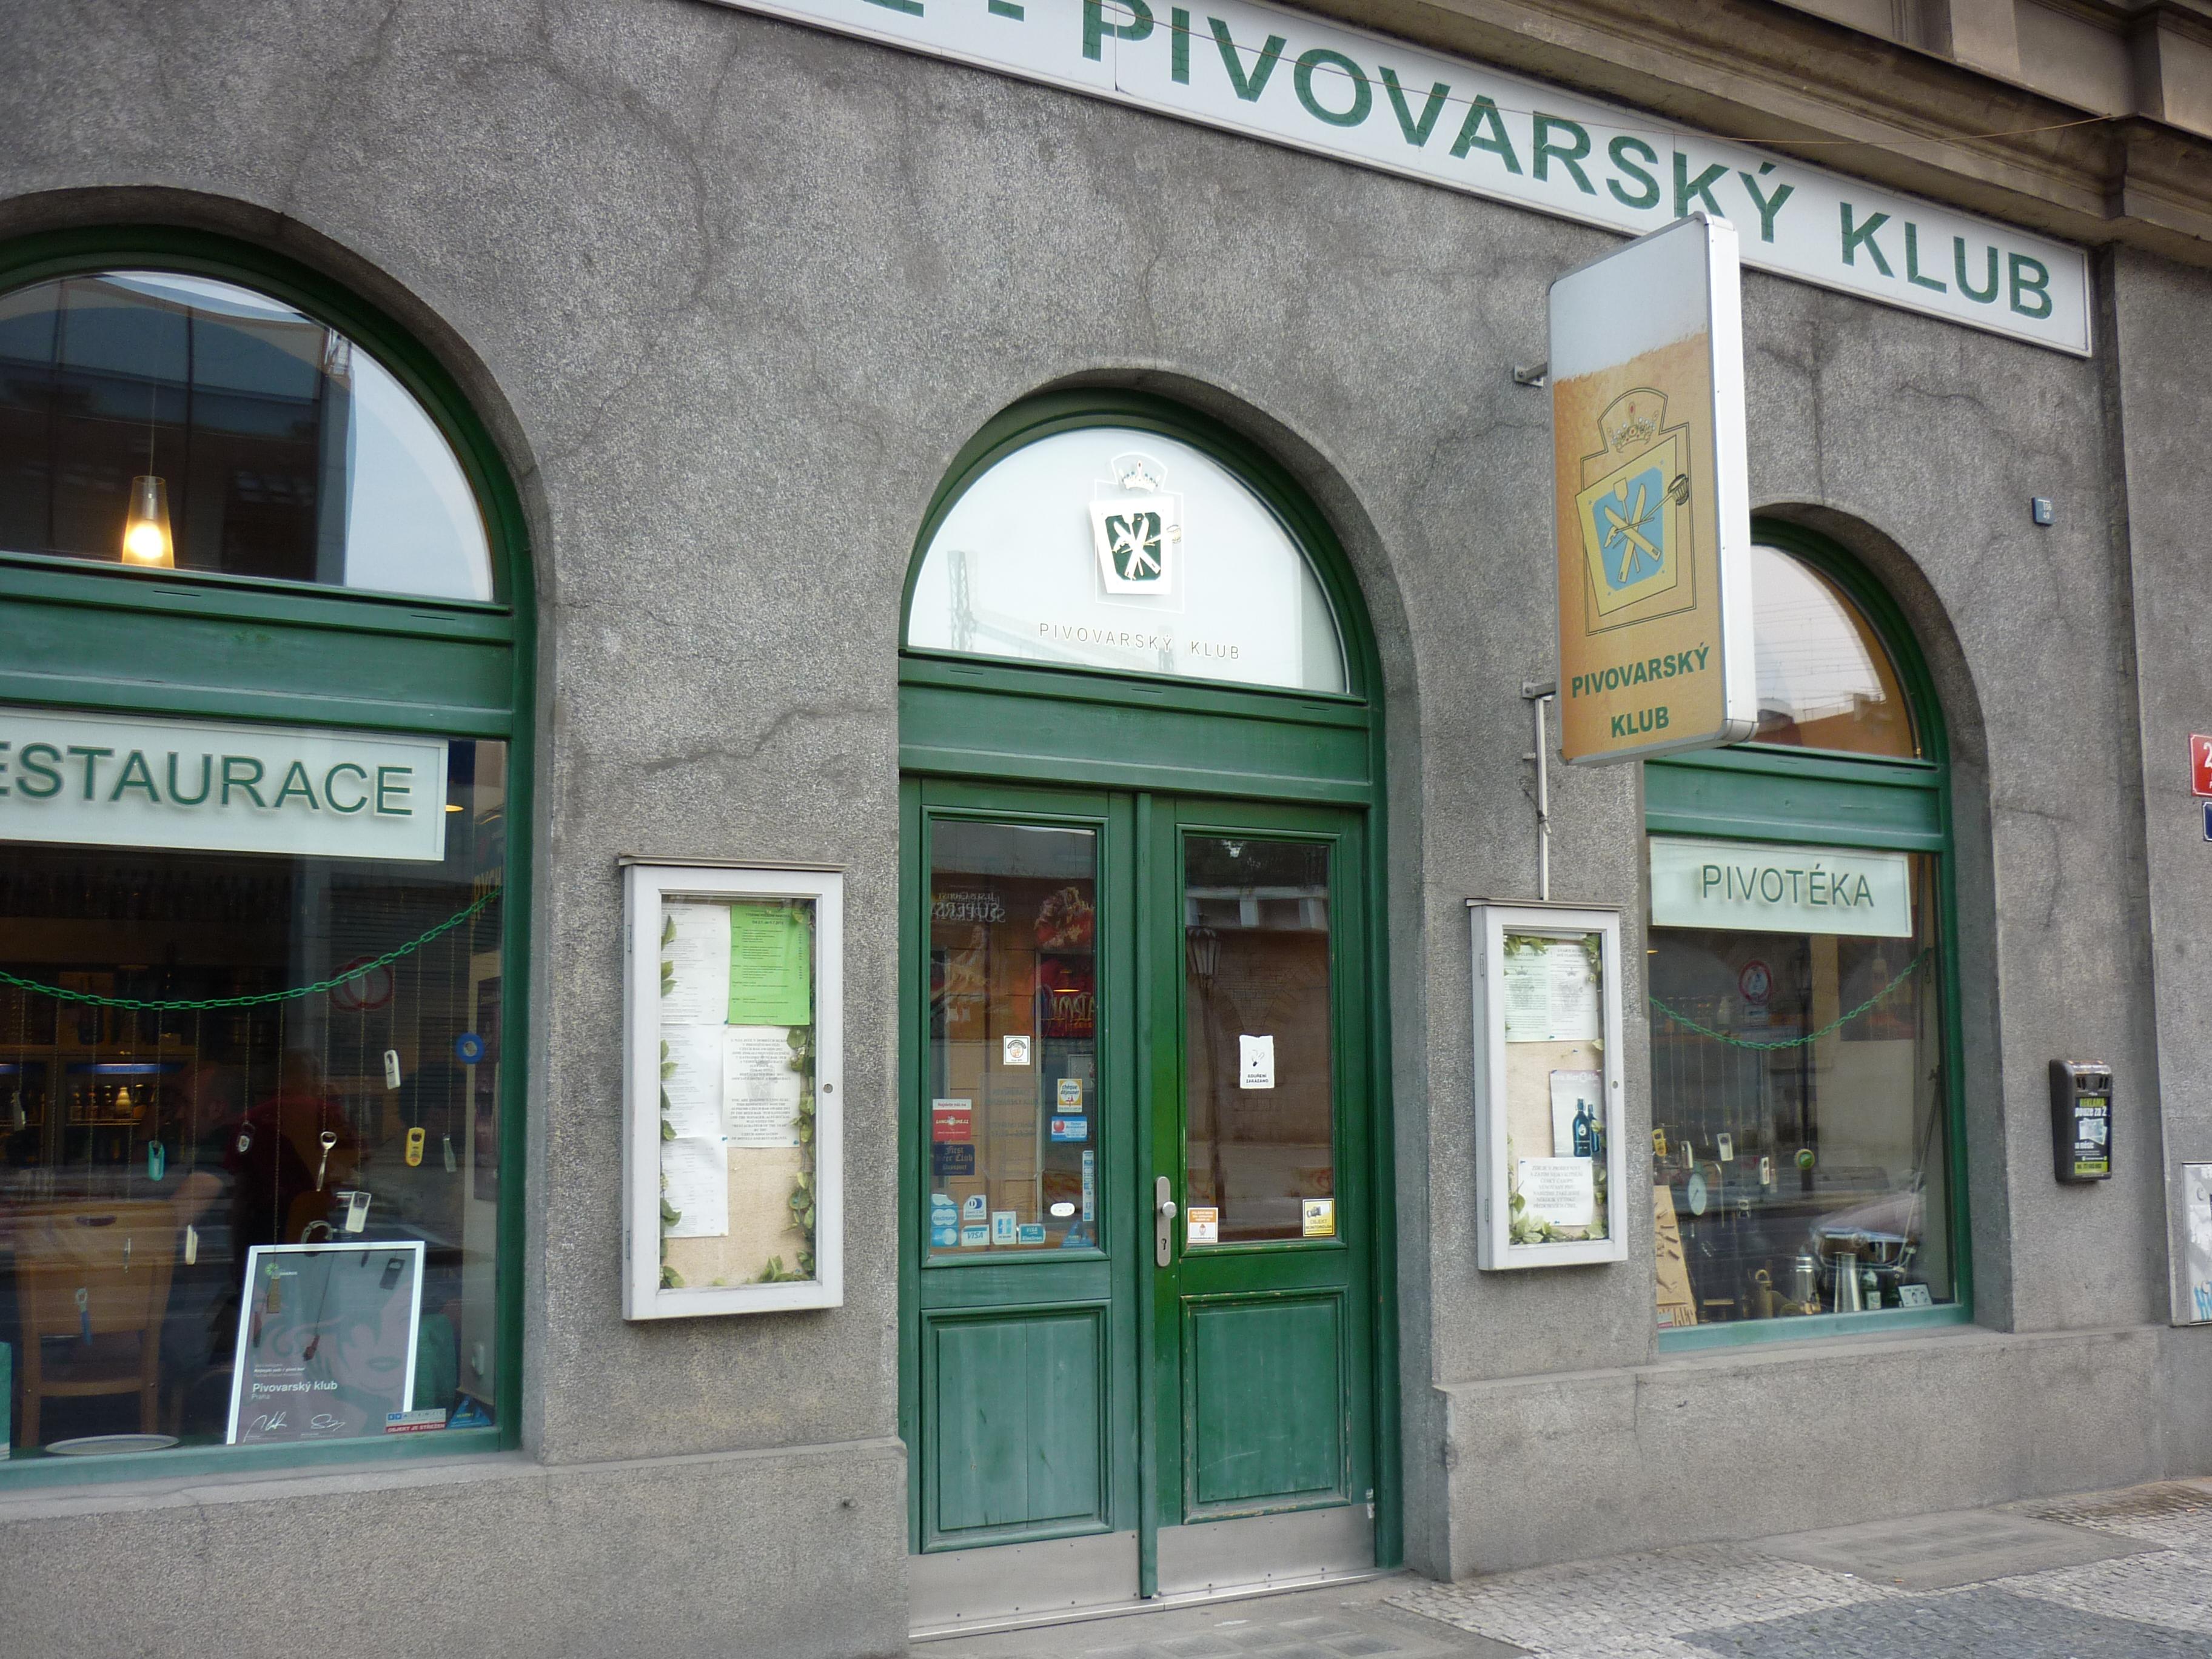 Cover image of this place Pivovarský klub